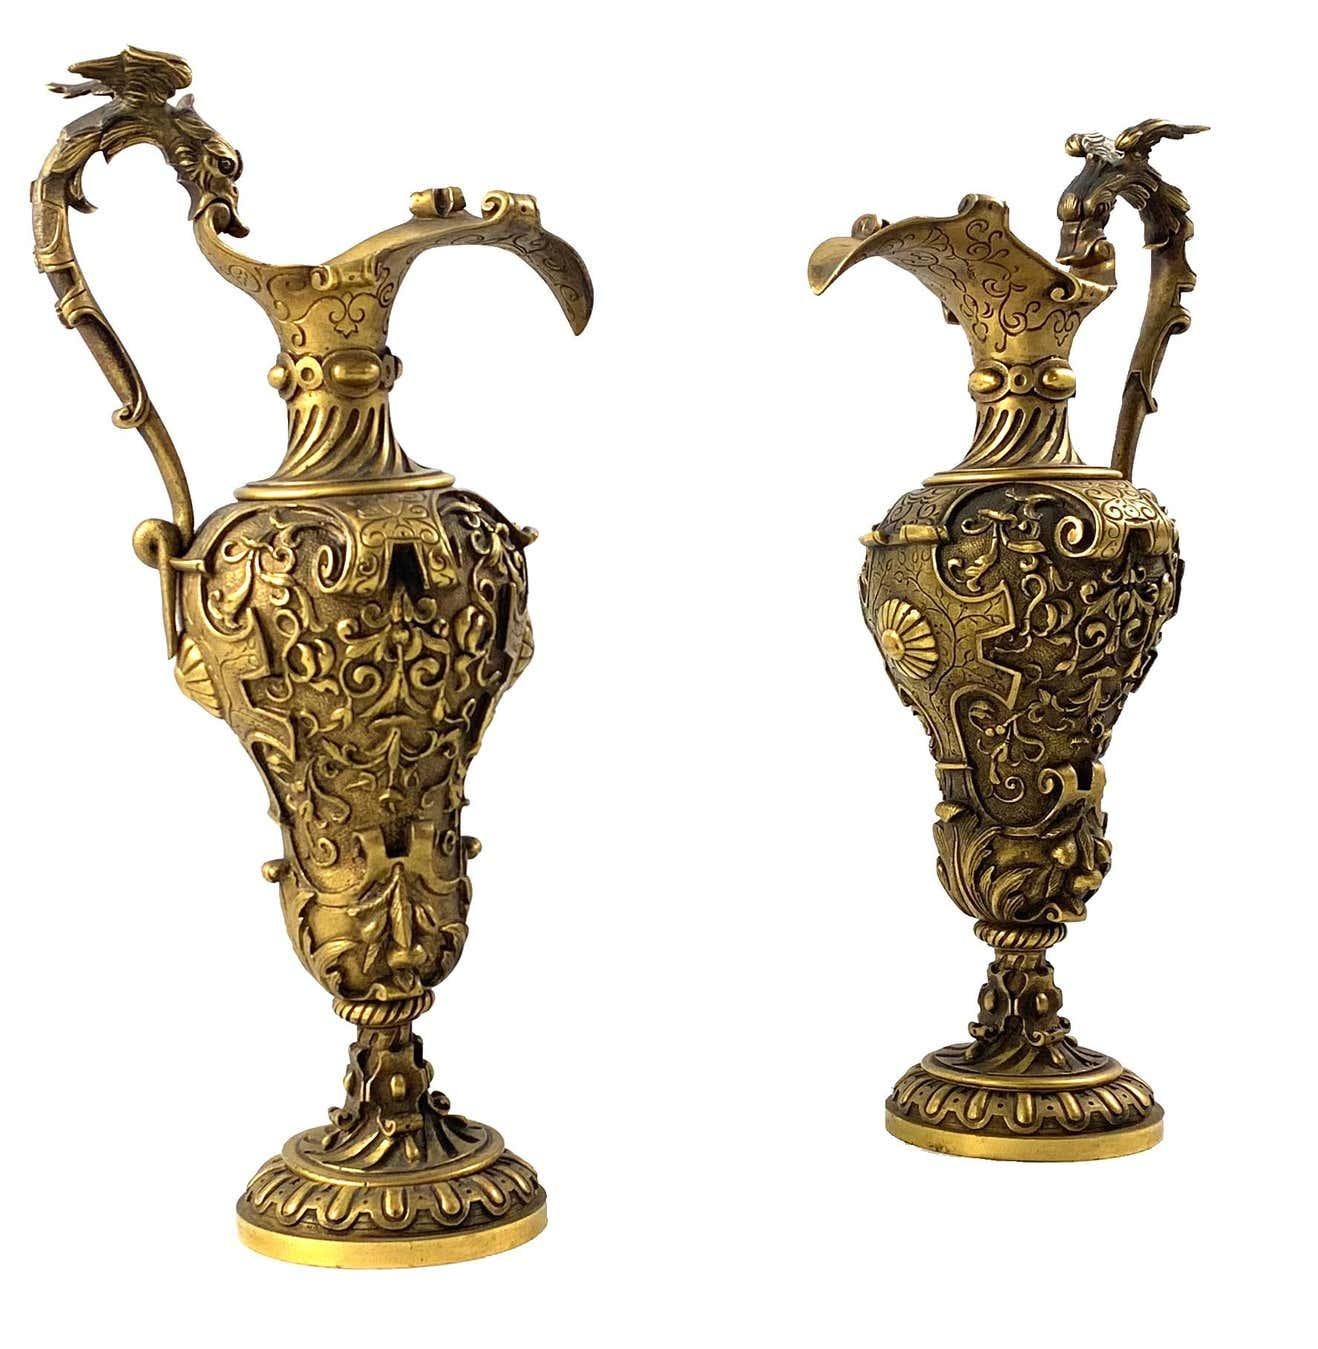 Hand-Crafted 19th Century Pair of Italian Renaissance Revival Cast Gilt Bronze Ewers For Sale